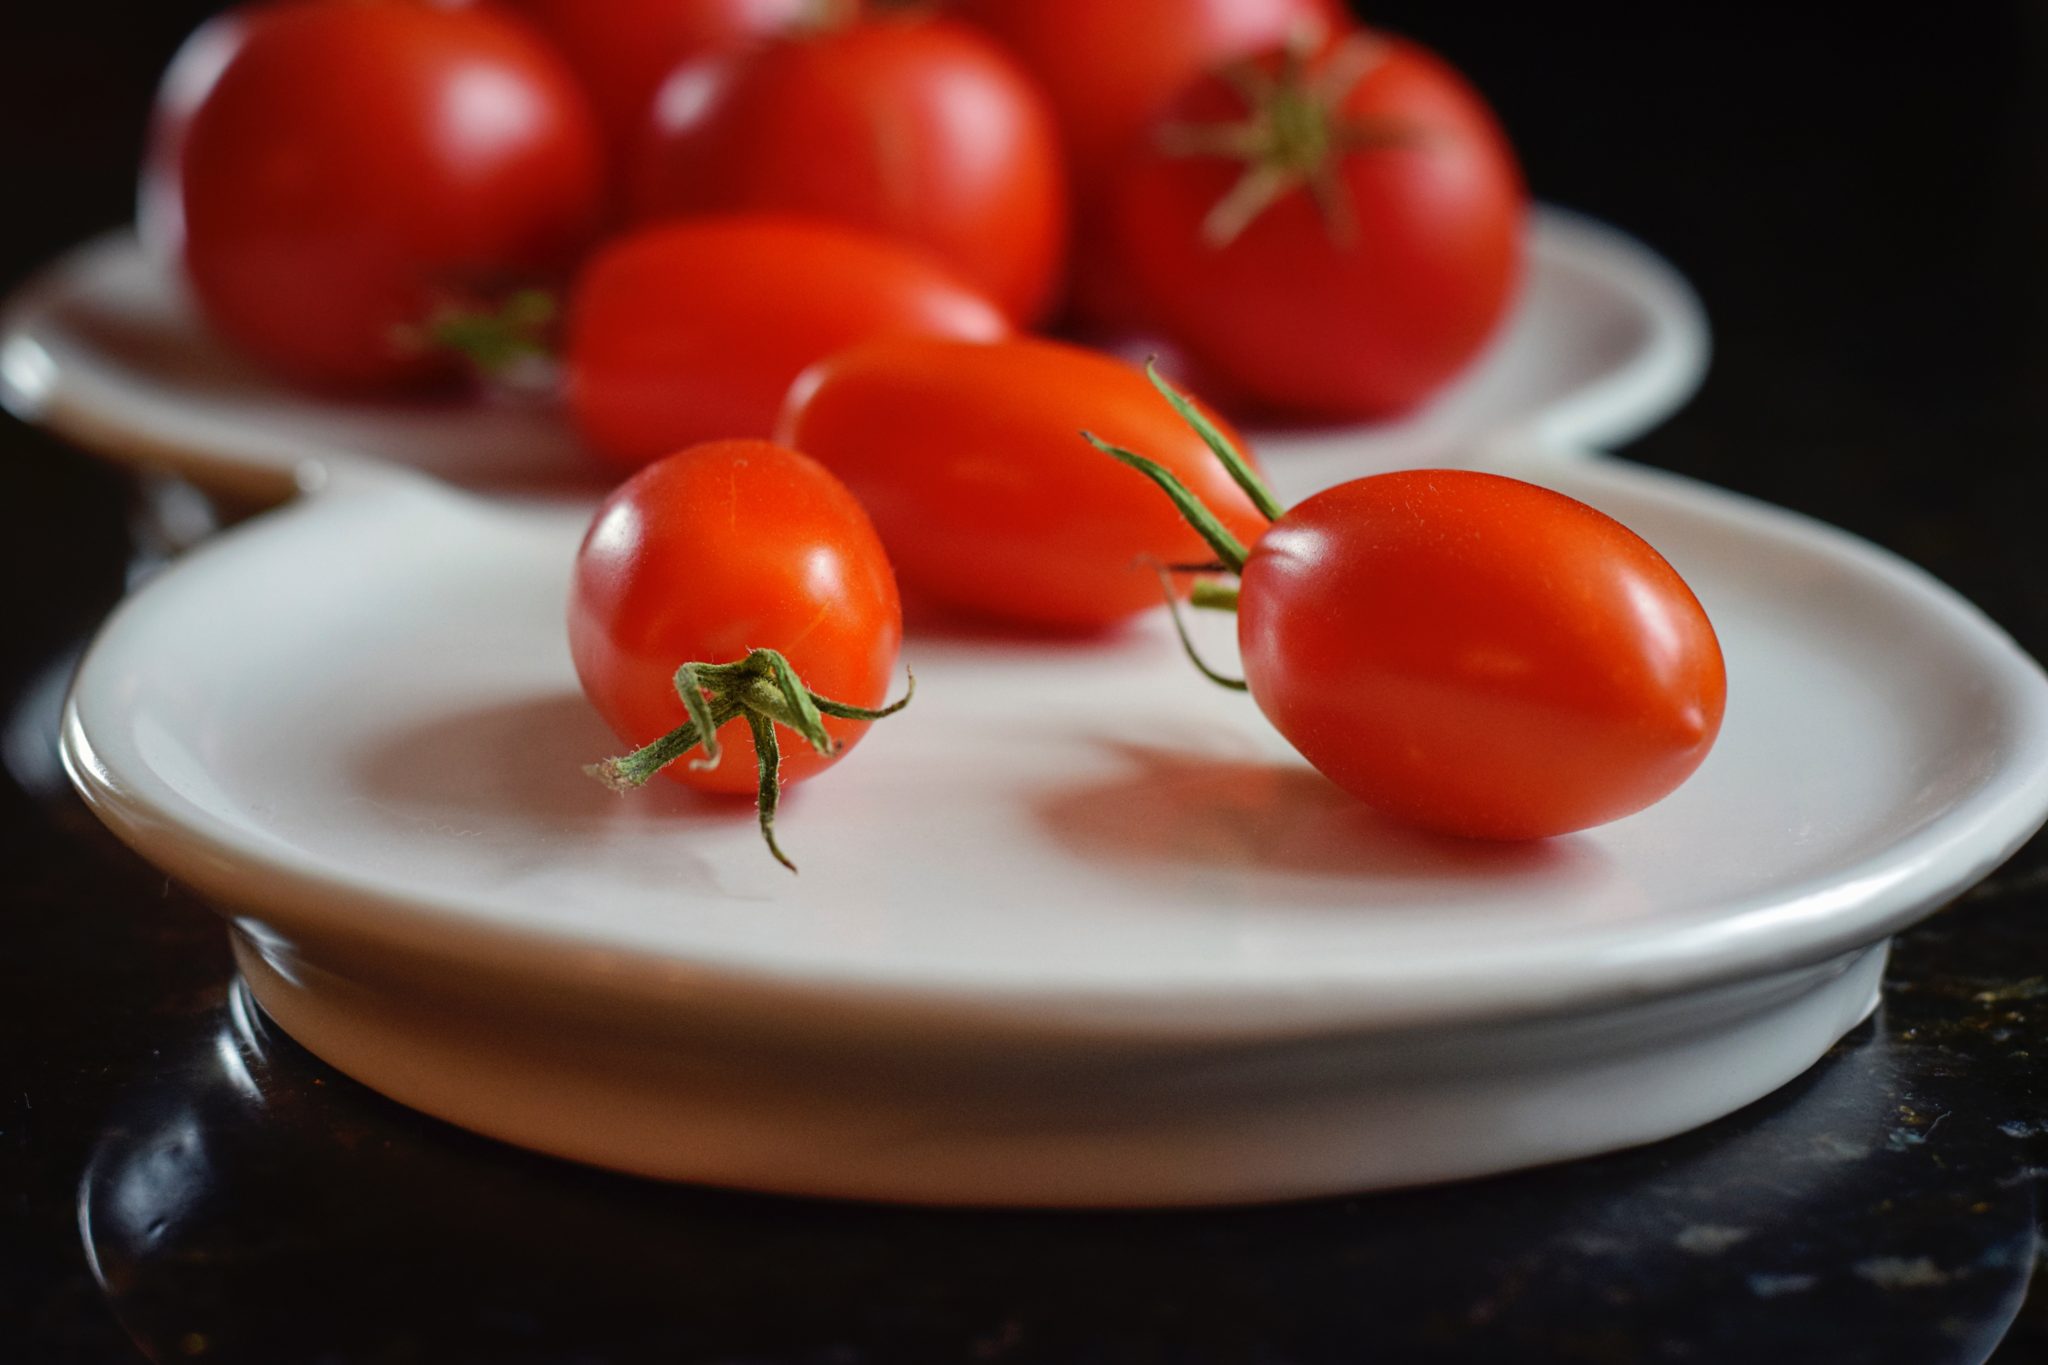 Tomatoes are rich in antioxidants